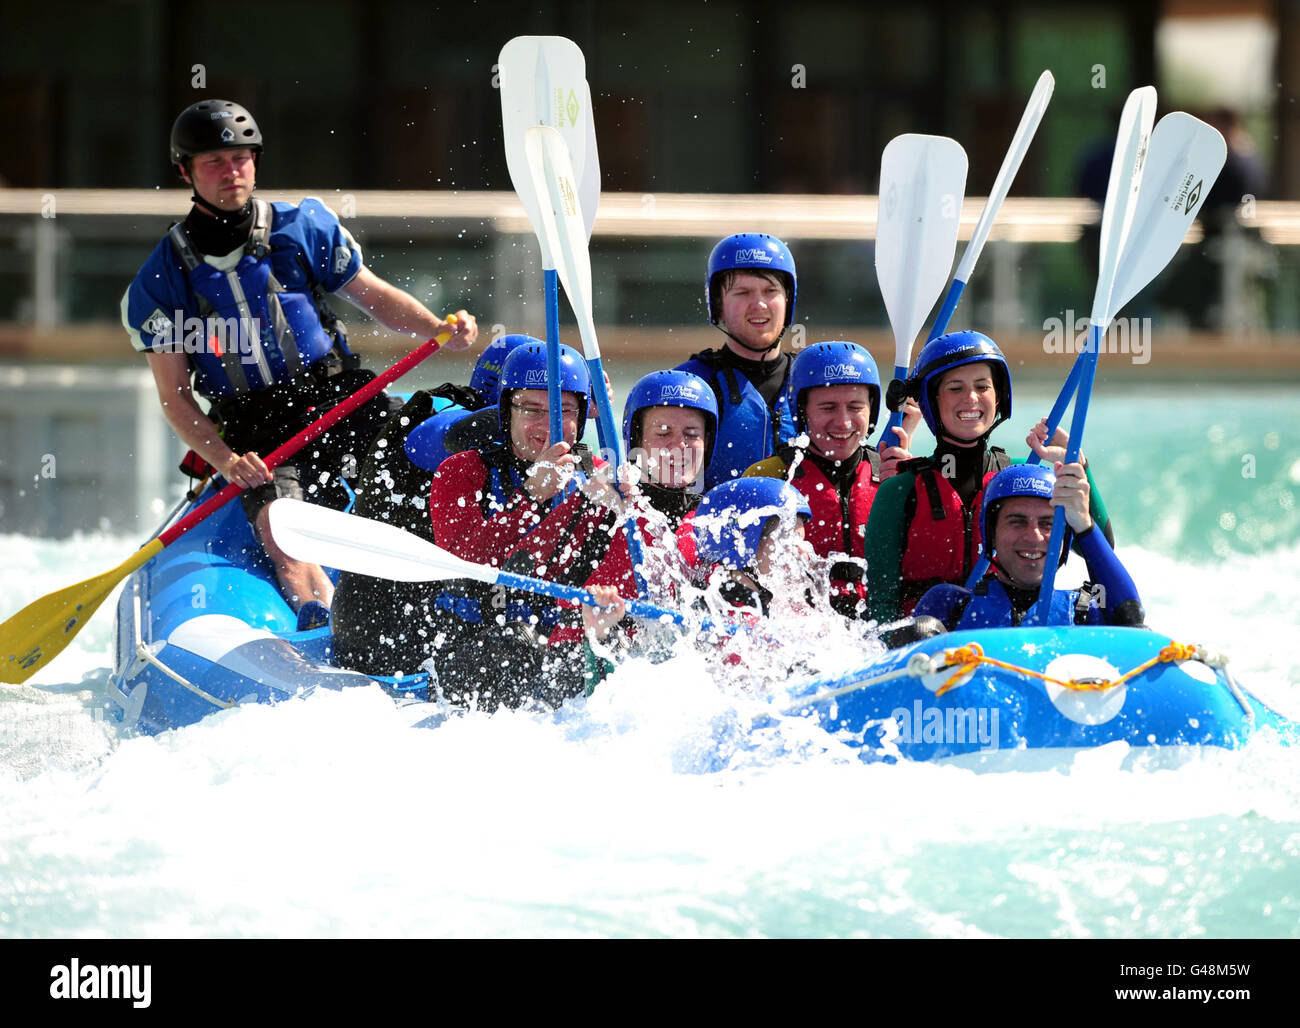 Press Association Journalist Ian Steadman samples the Olympic Canoeing course during the Lee Valley White Water Centre Media Day, Hertfordshire. Stock Photo